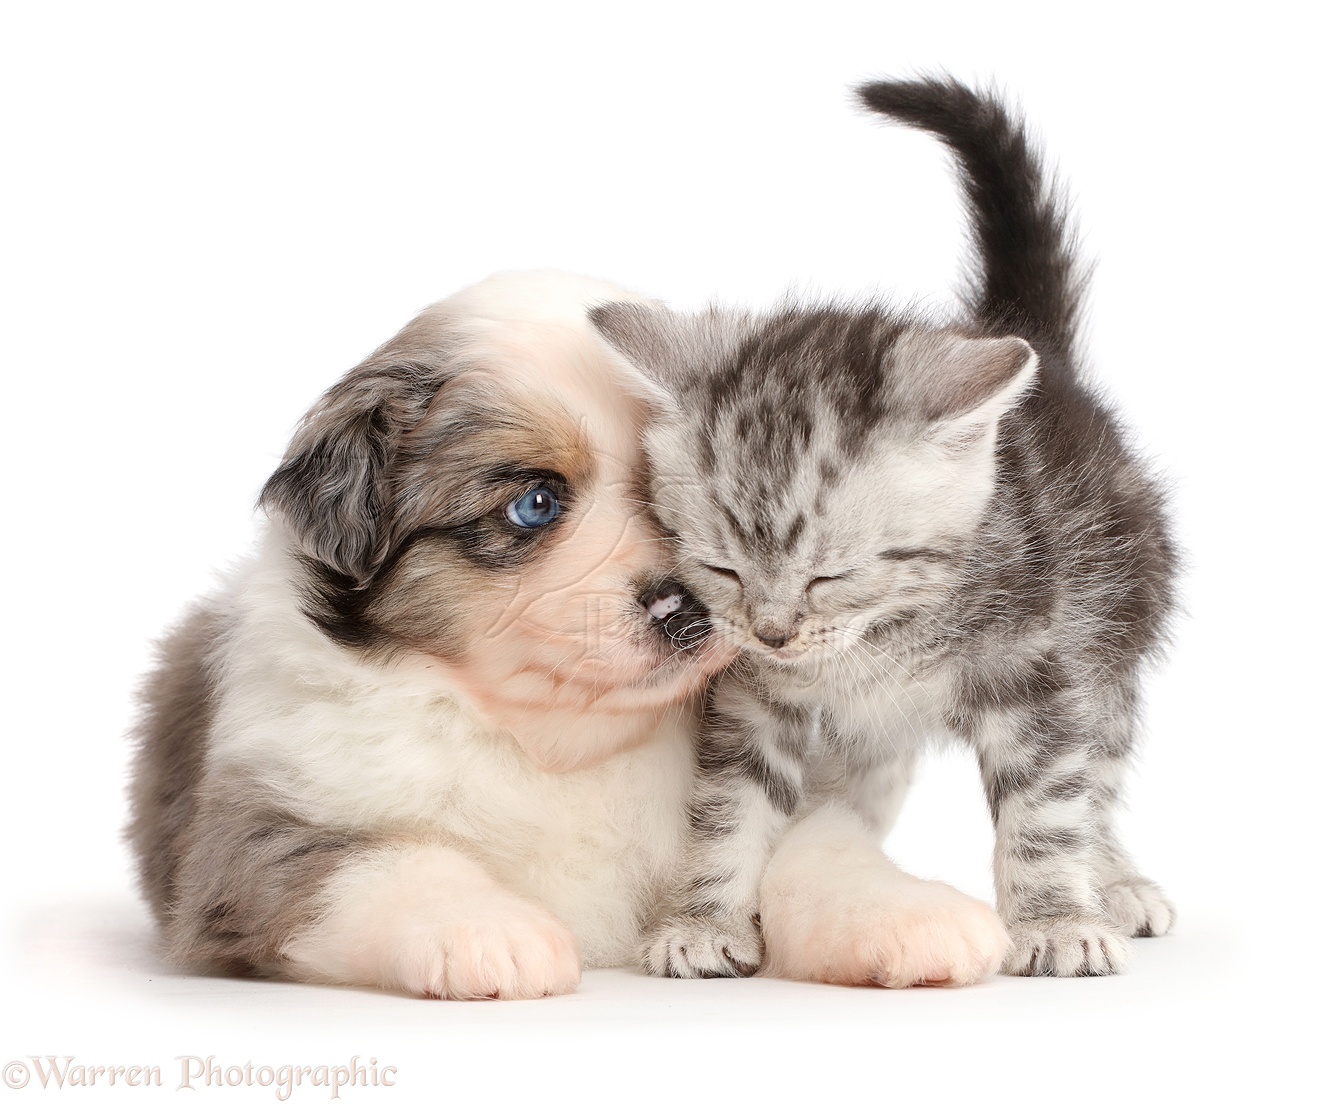 Pets: Miniature American Shepherd puppy snuggling with a kitten photo  WP44738